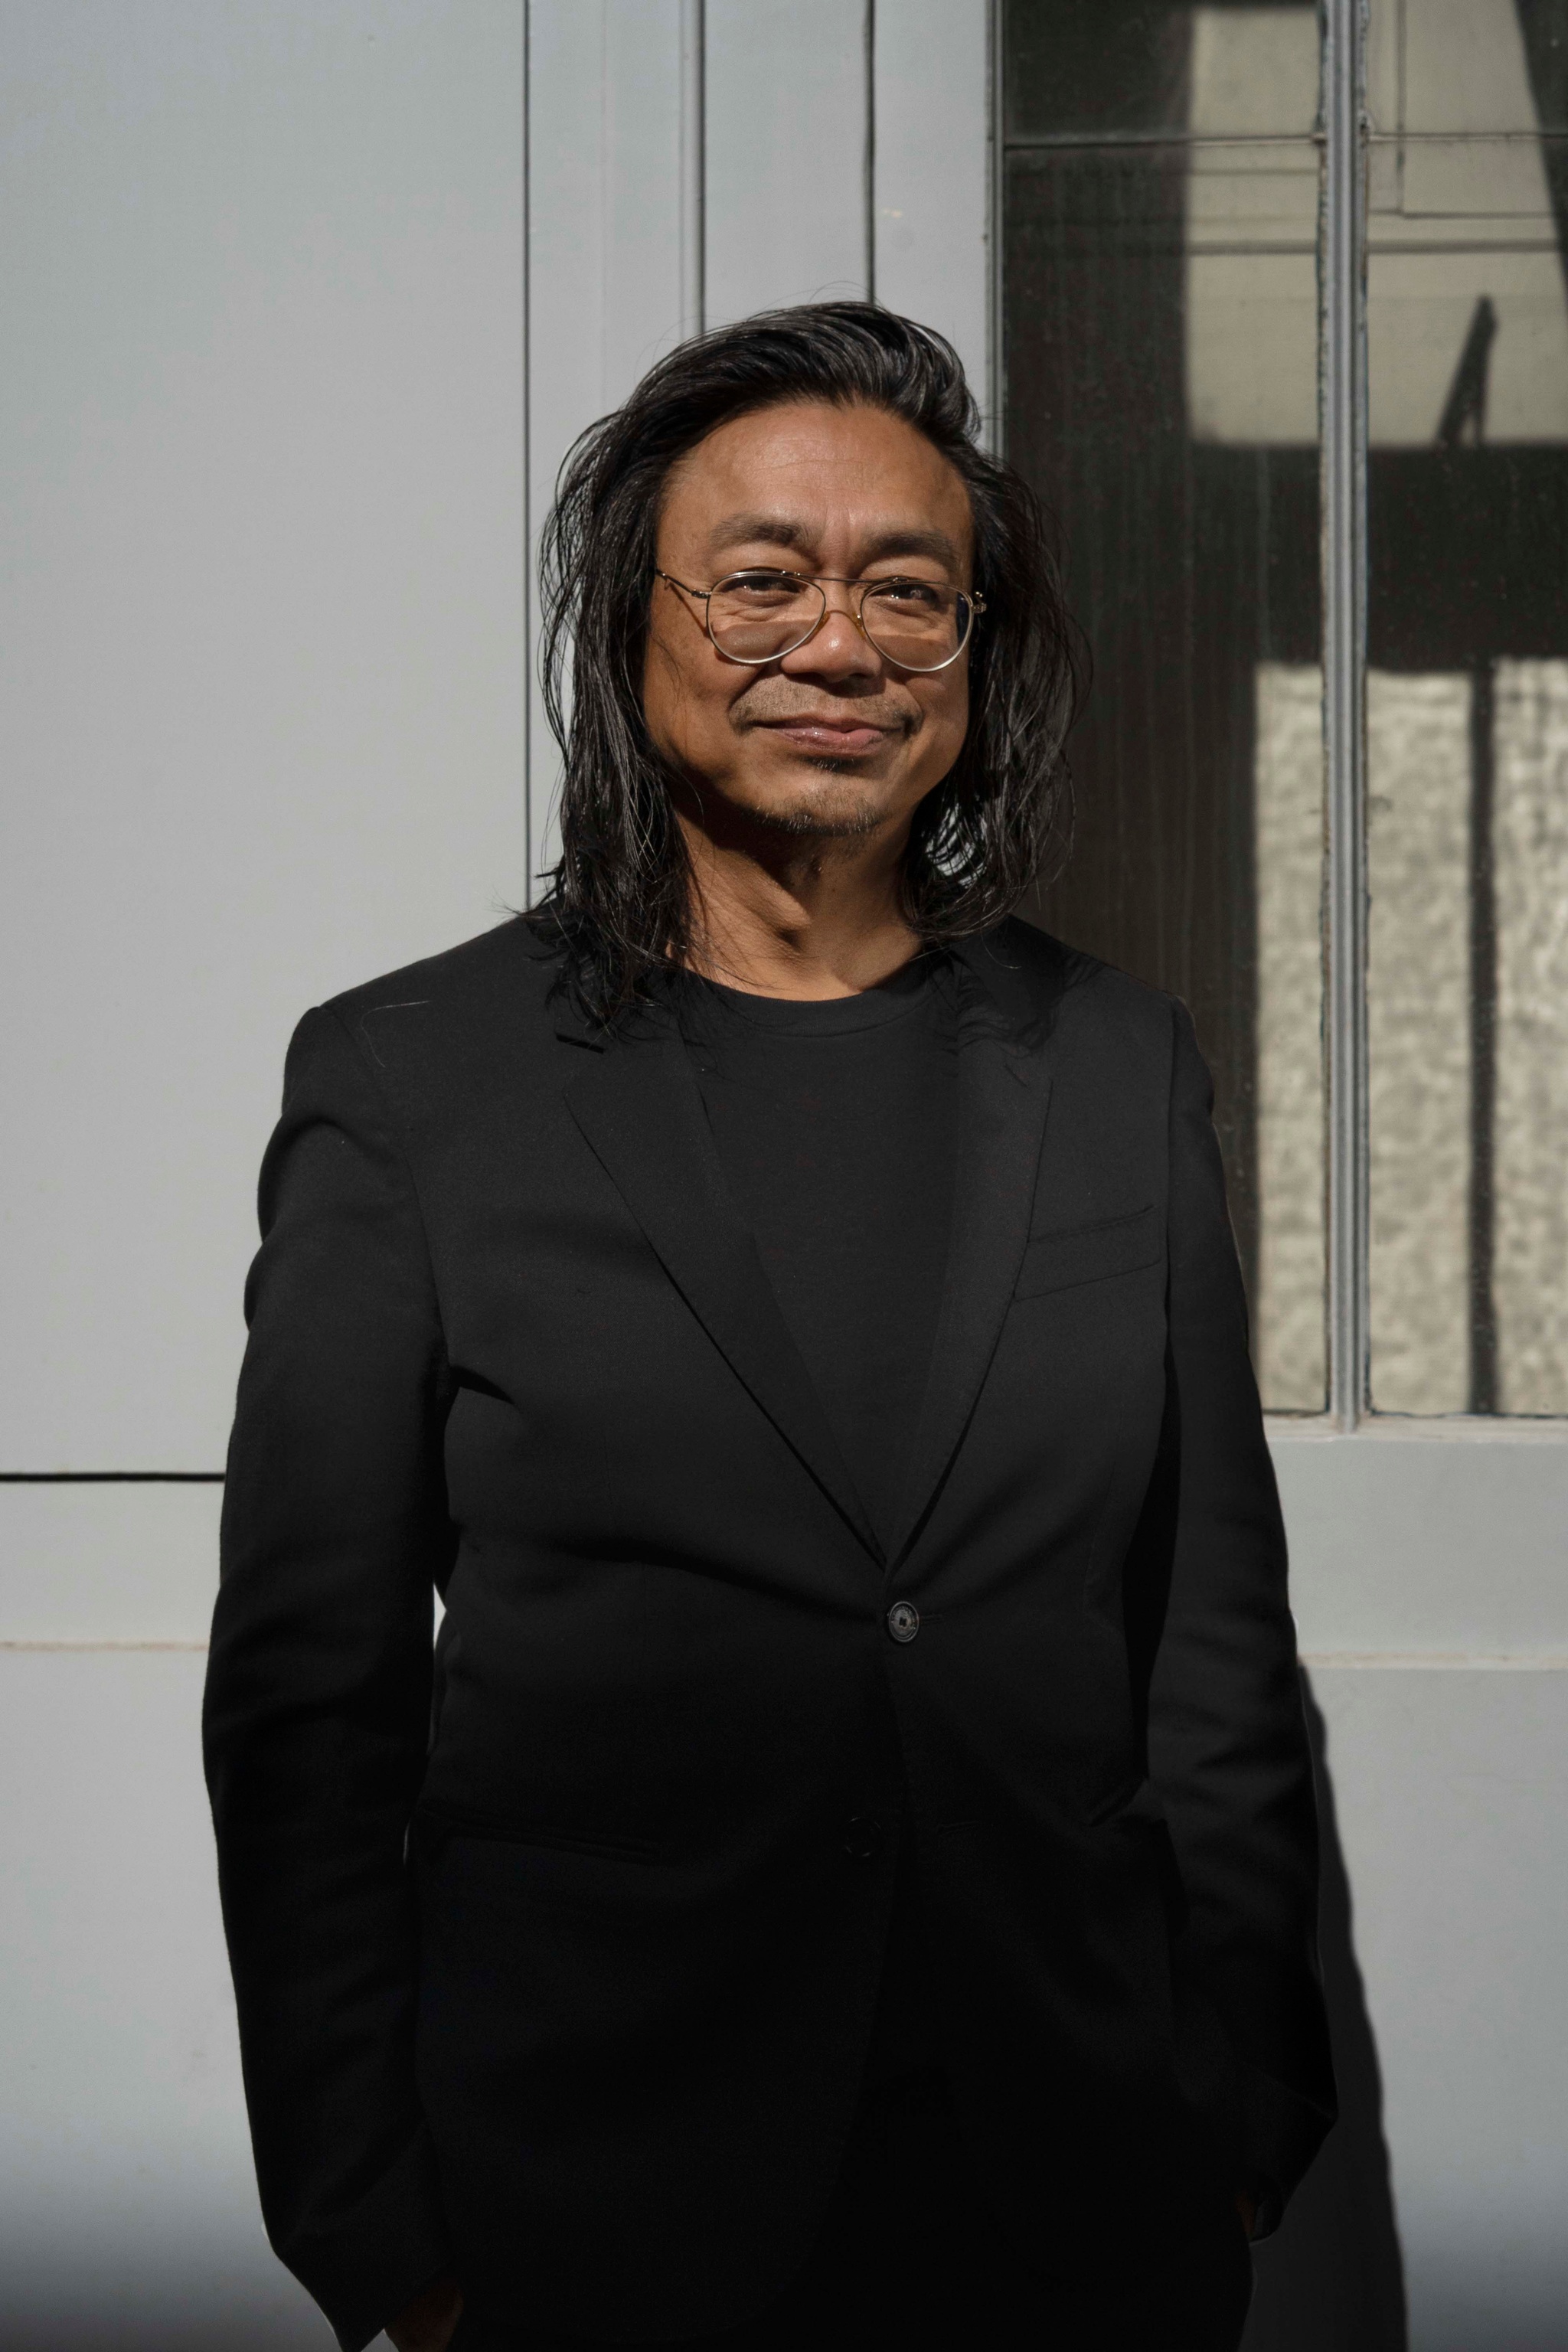 A Thai man with shoulder length hair and wearing glasses smiles wryly. He stands with arms at his side against a concrete wall.